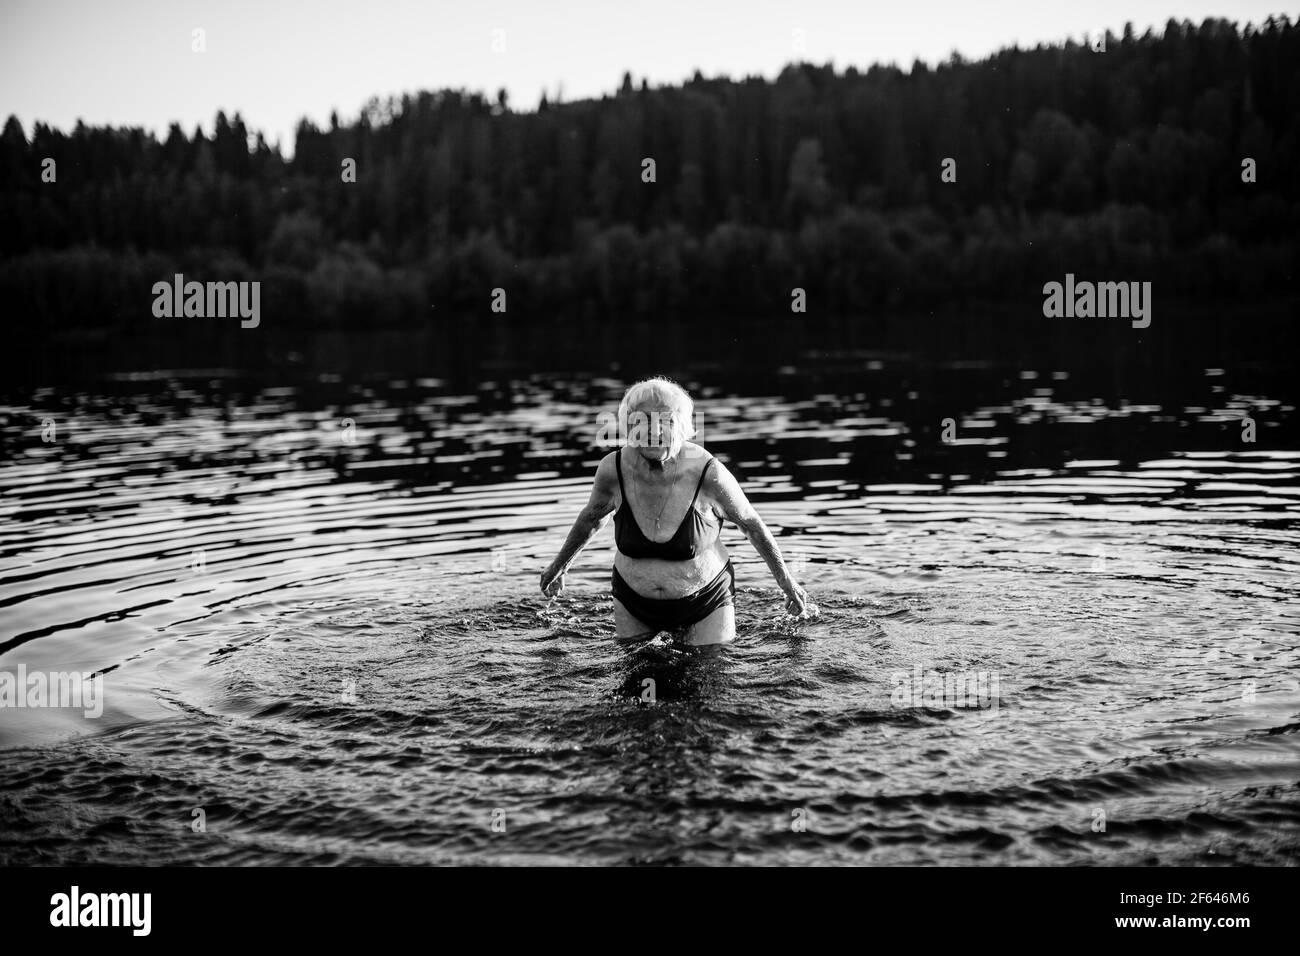 An old woman swimming in the summer river. Black and white photo. Stock Photo